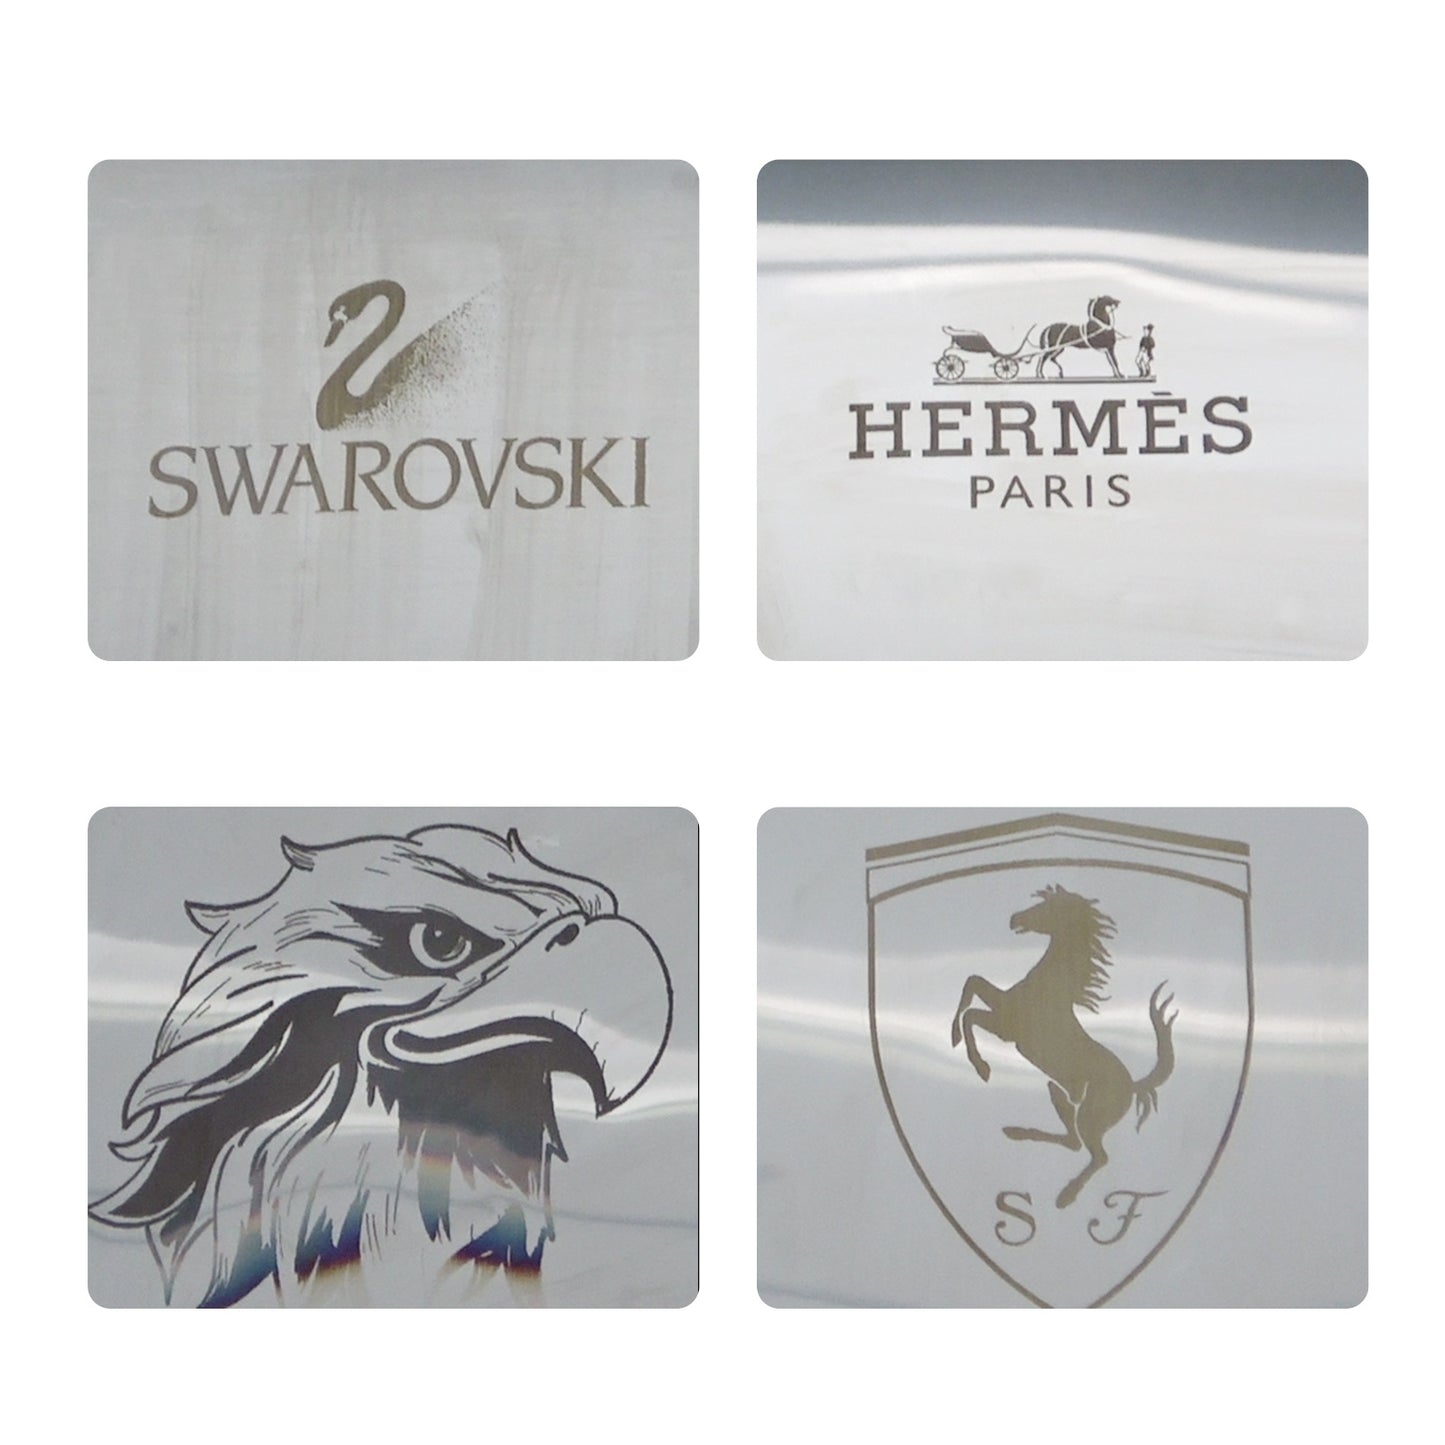 The laser engraving machine is made of stainless steel leather nameplate